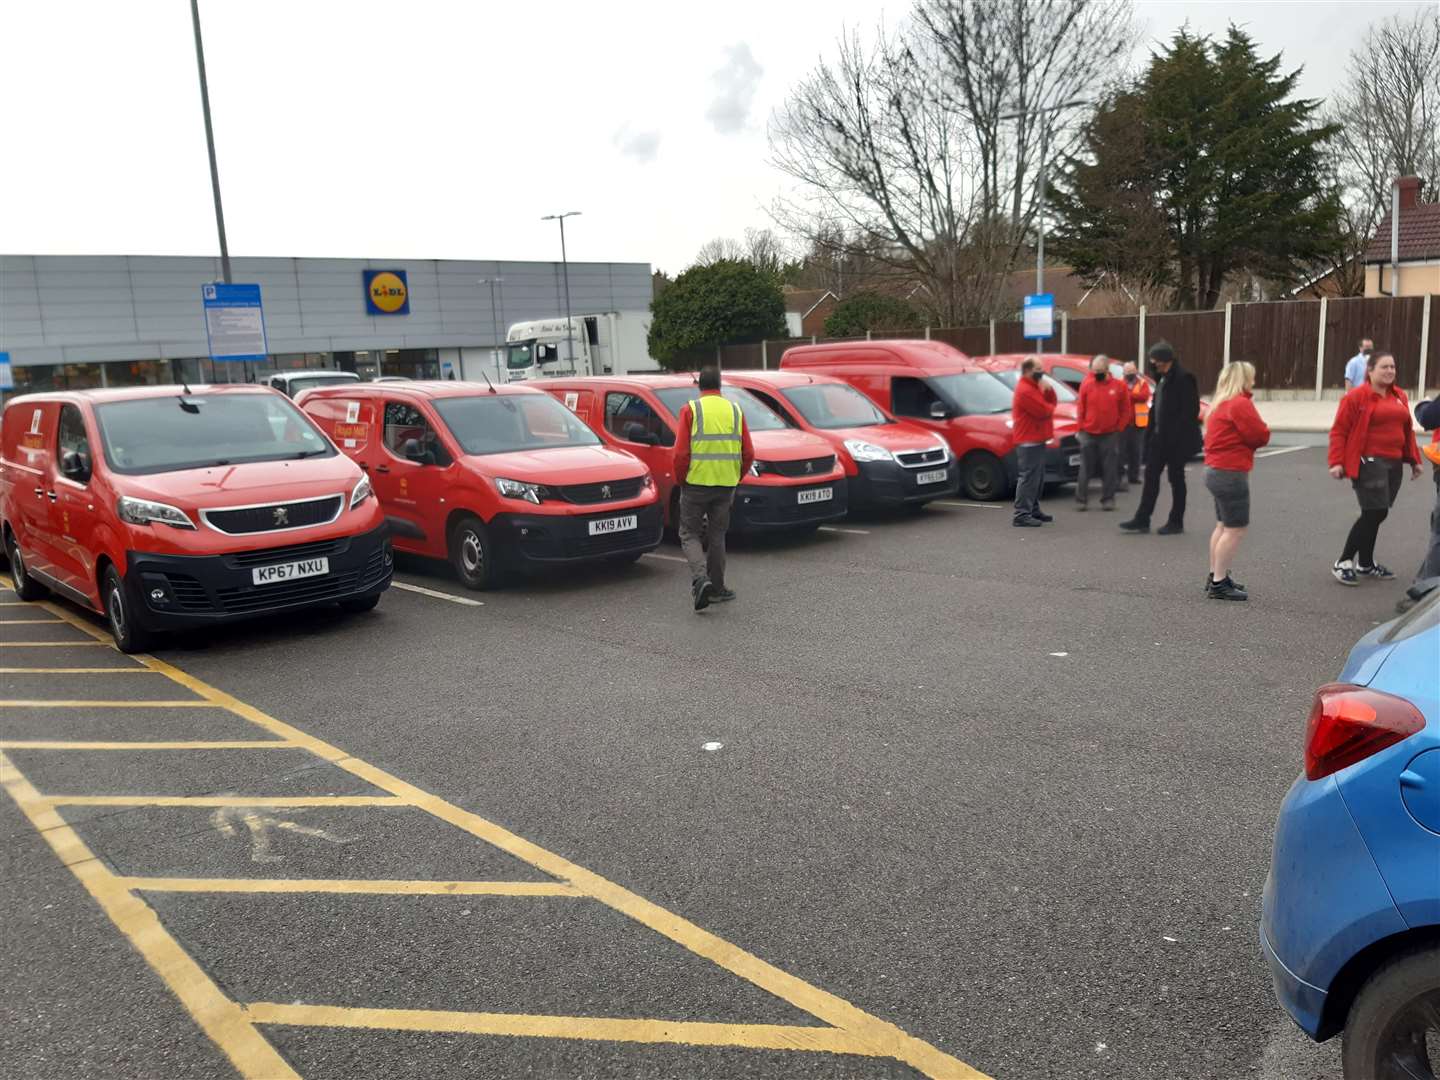 The postal vans joined at Lidl